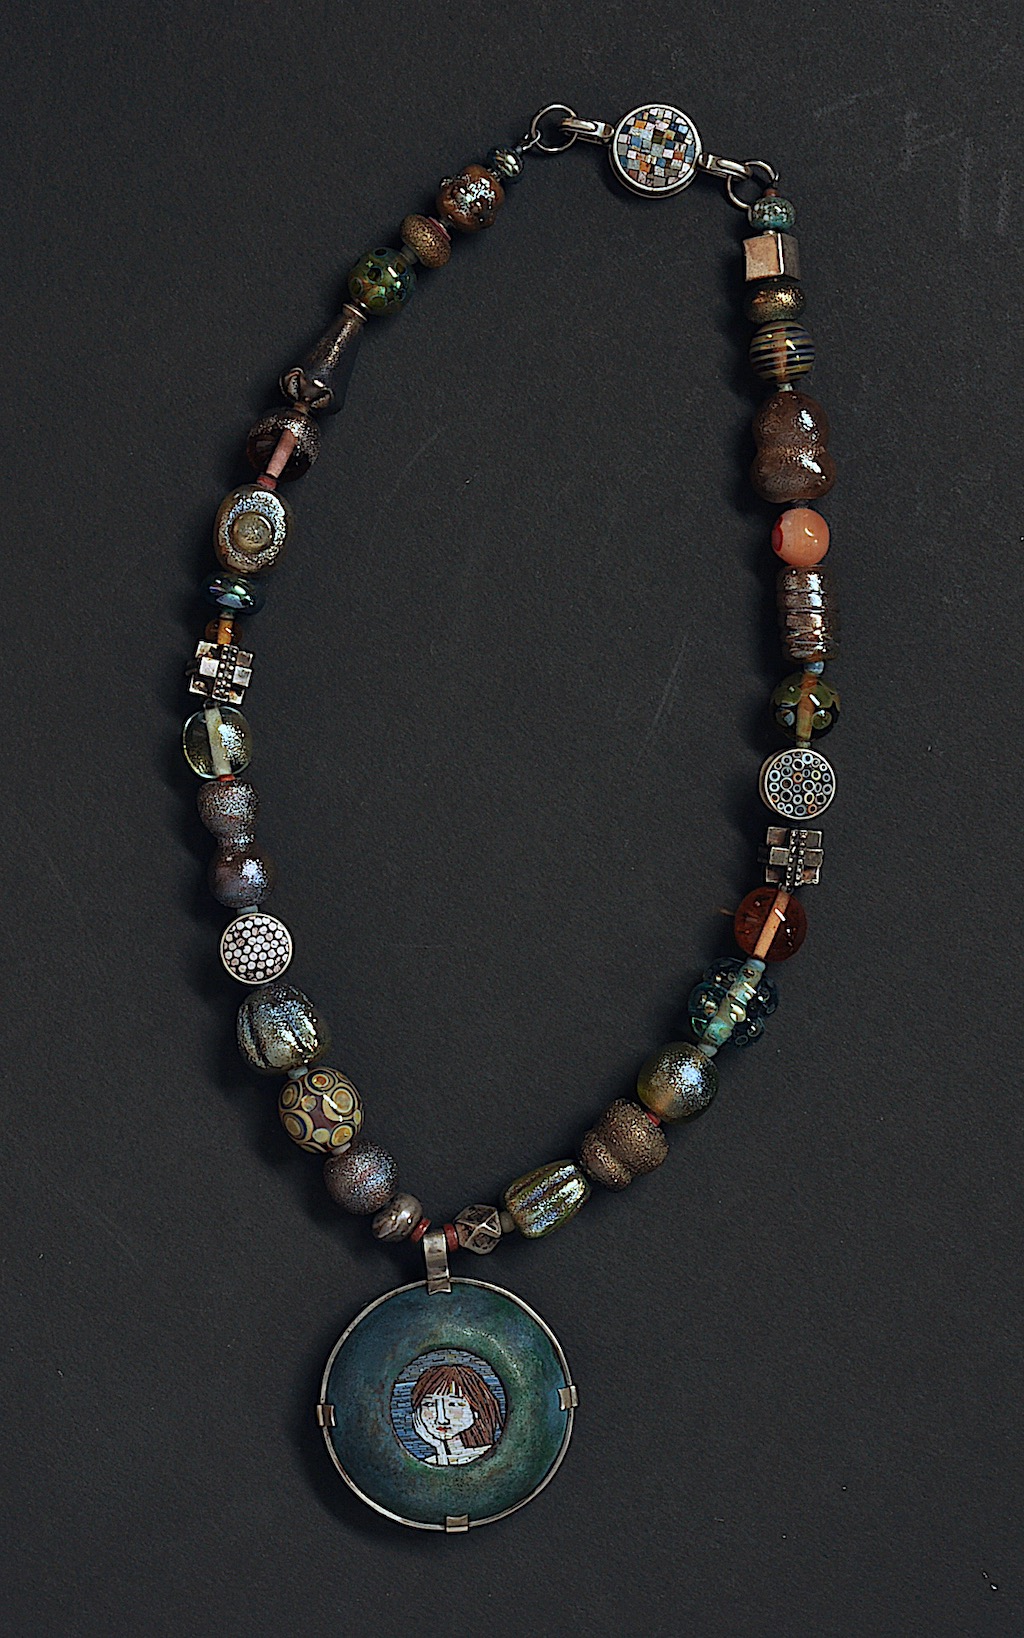 Talisman & Amulets: Protective Jewelry in the Age of Covid